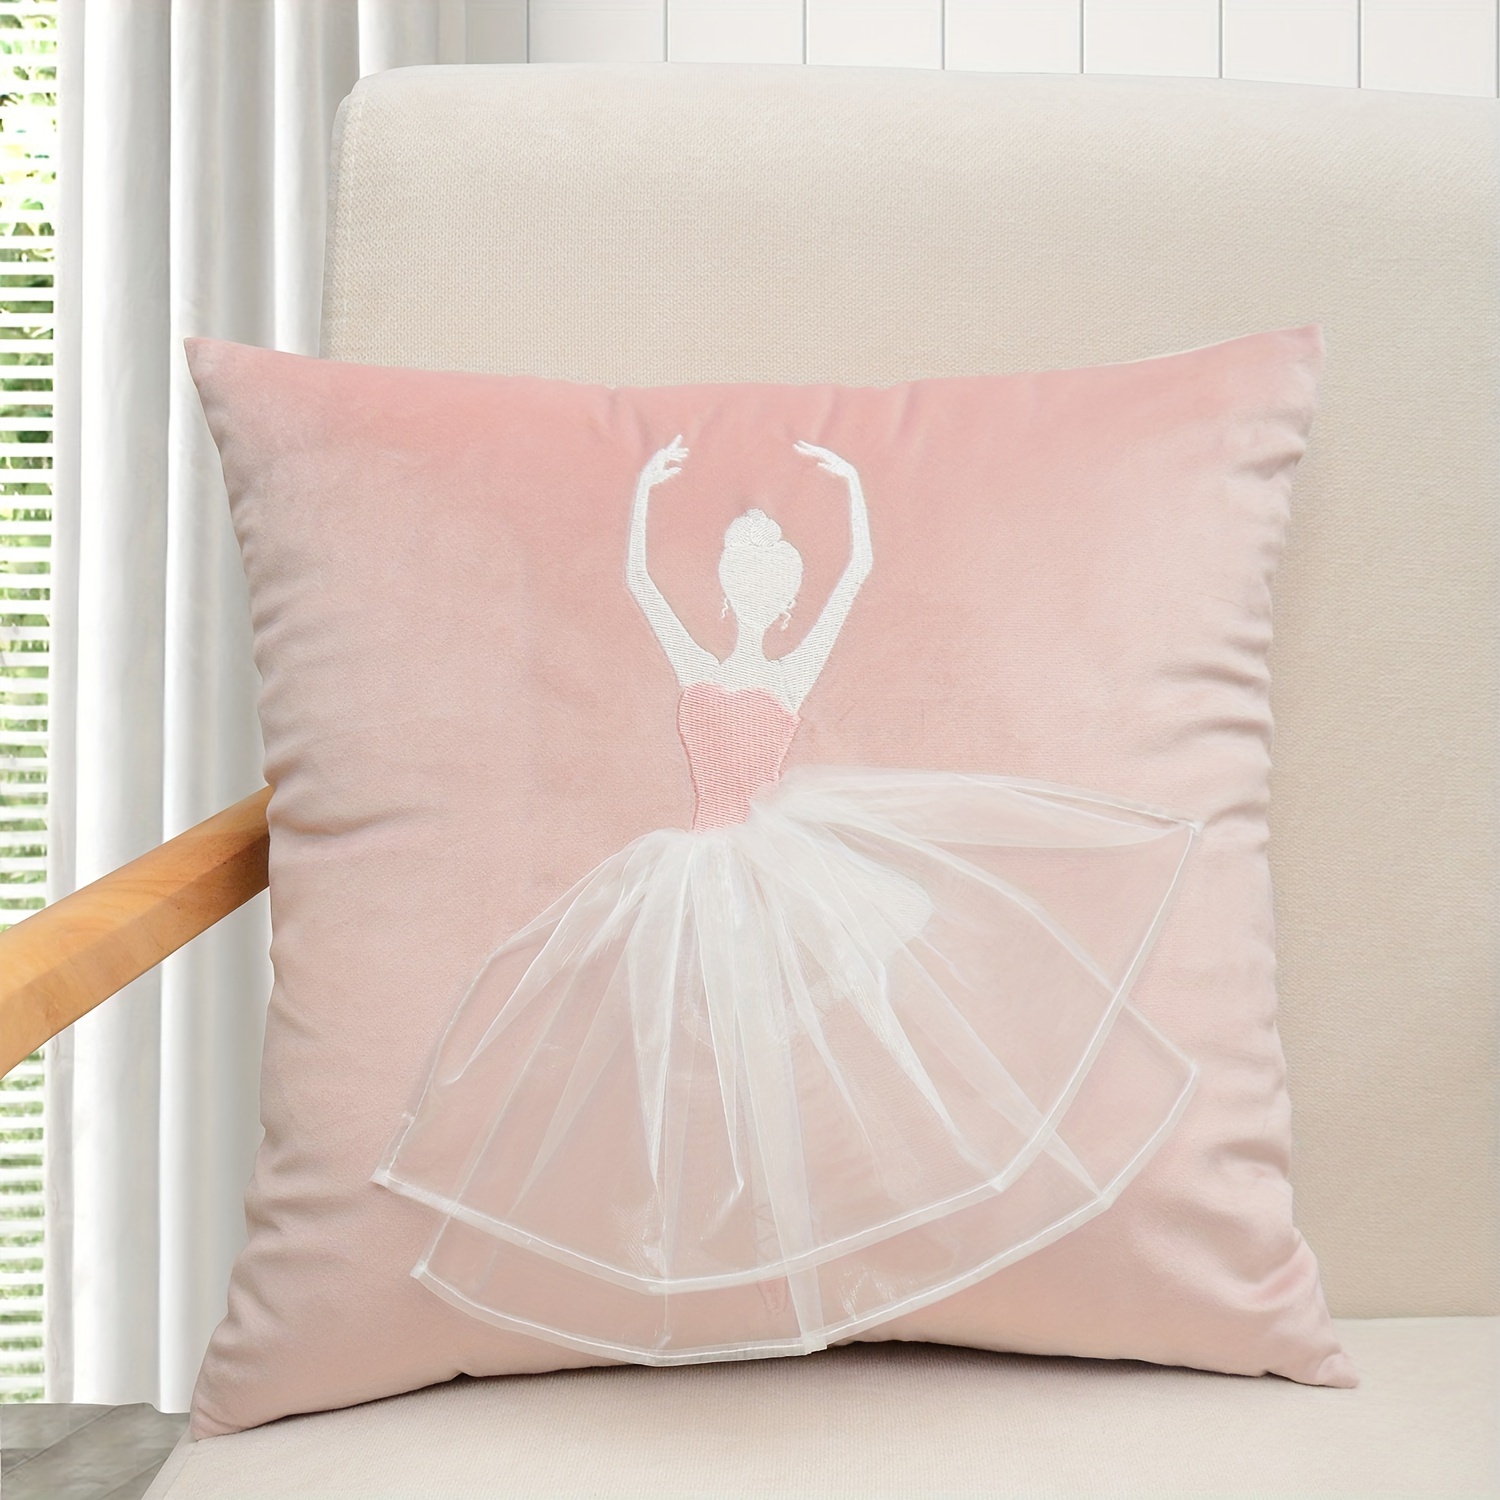 

Contemporary Embroidered Ballerina Throw Pillow Cover, 1pc Ballet Dancer Cushion Case, Machine Washable, Decorative Zippered Pillowcase, Polyester, For Various Room Types - 17.7inch